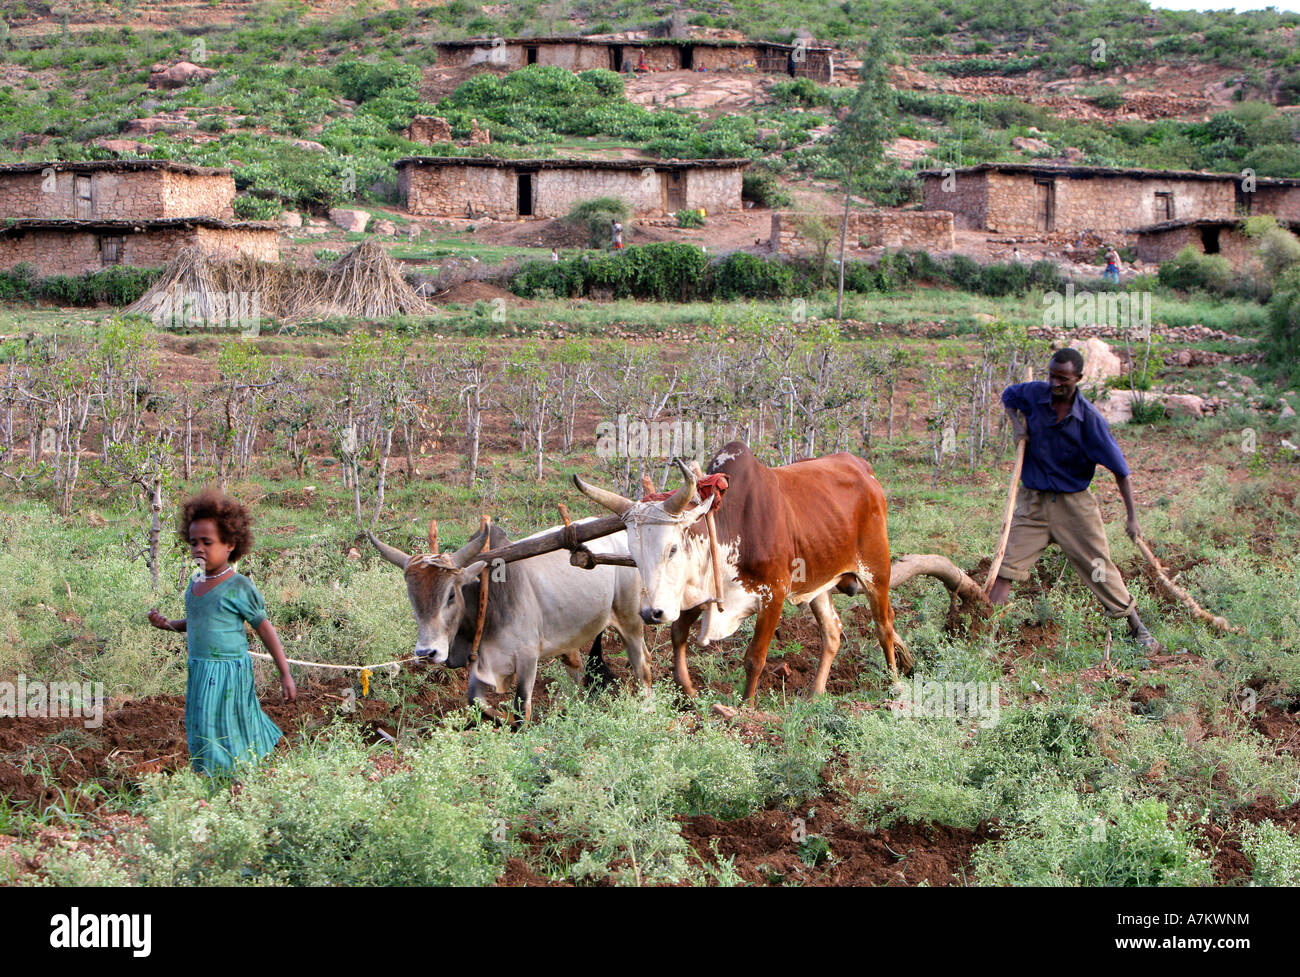 Ethiopia - a girl leads cattles in plowing her families farmland Stock Photo